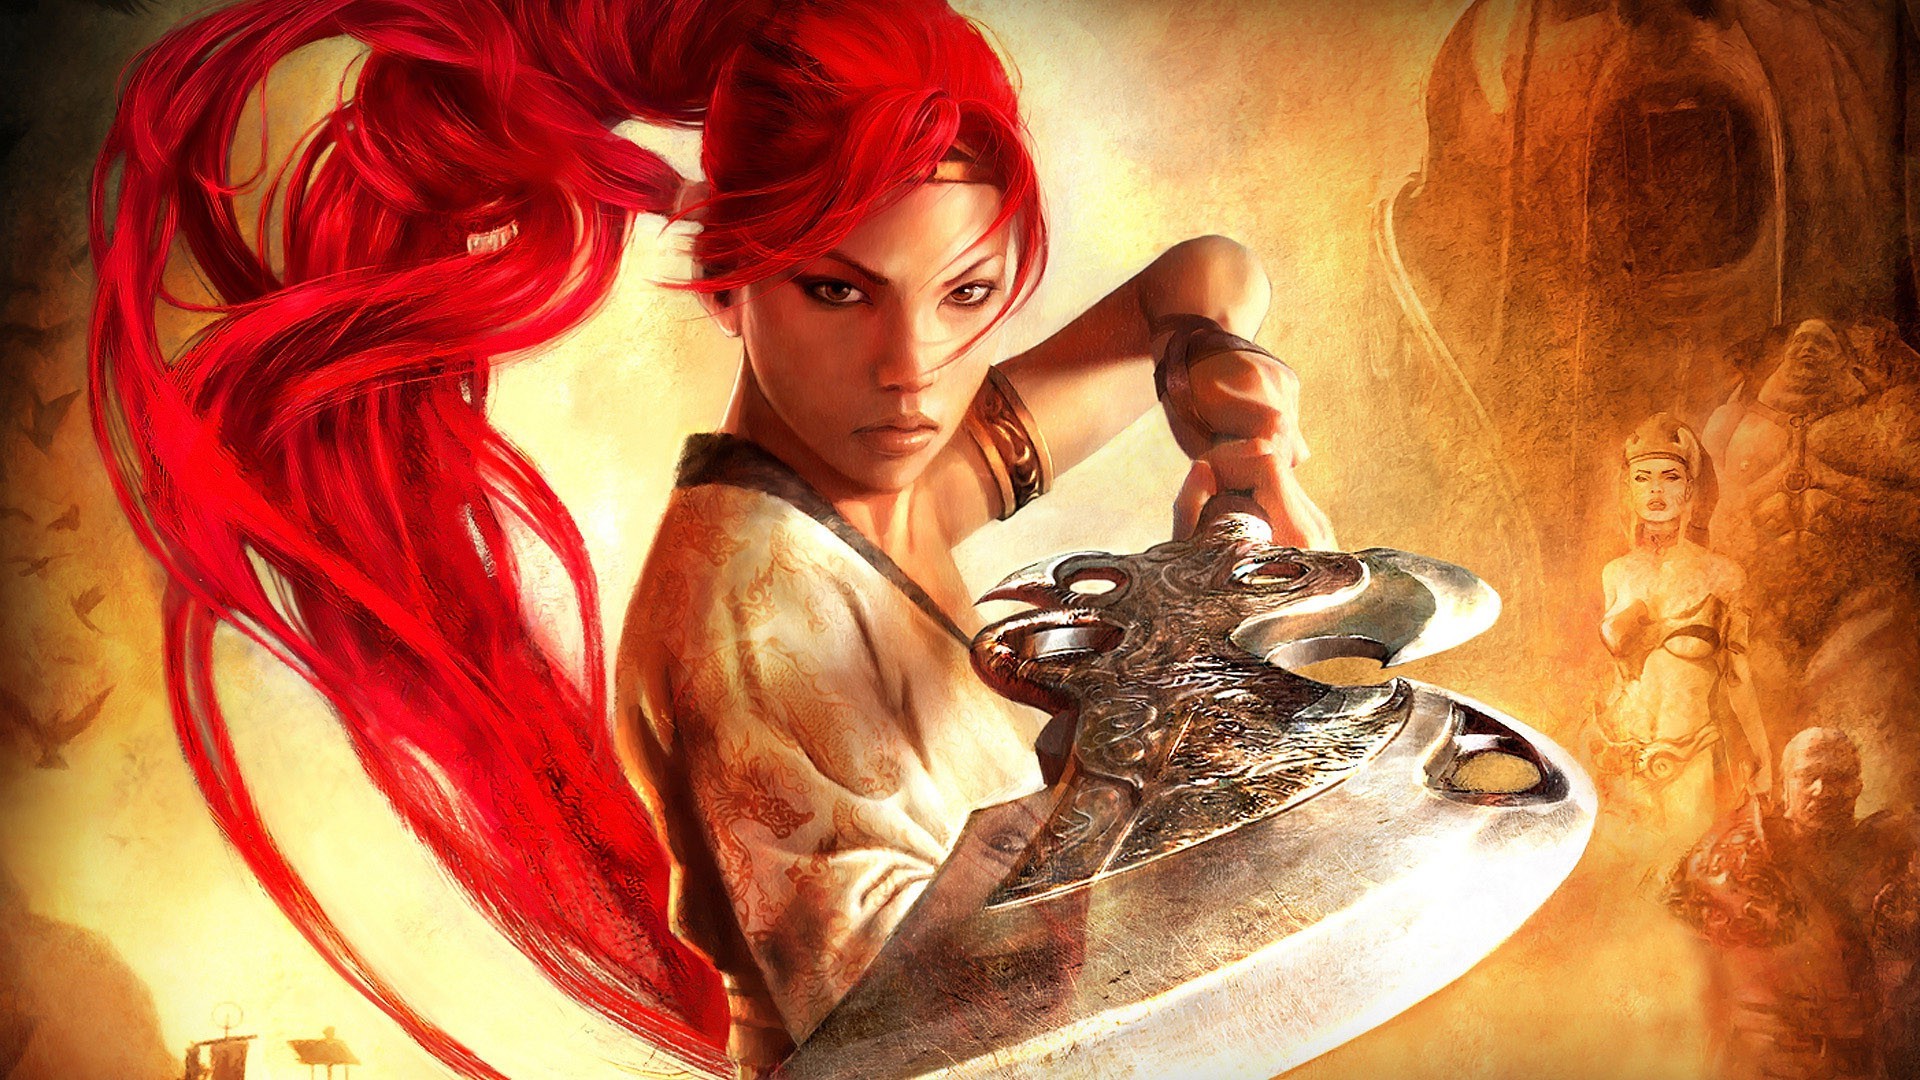 Heavenly Sword Playstation 3 Sony Wallpapers Hd Desktop And Mobile Backgrounds